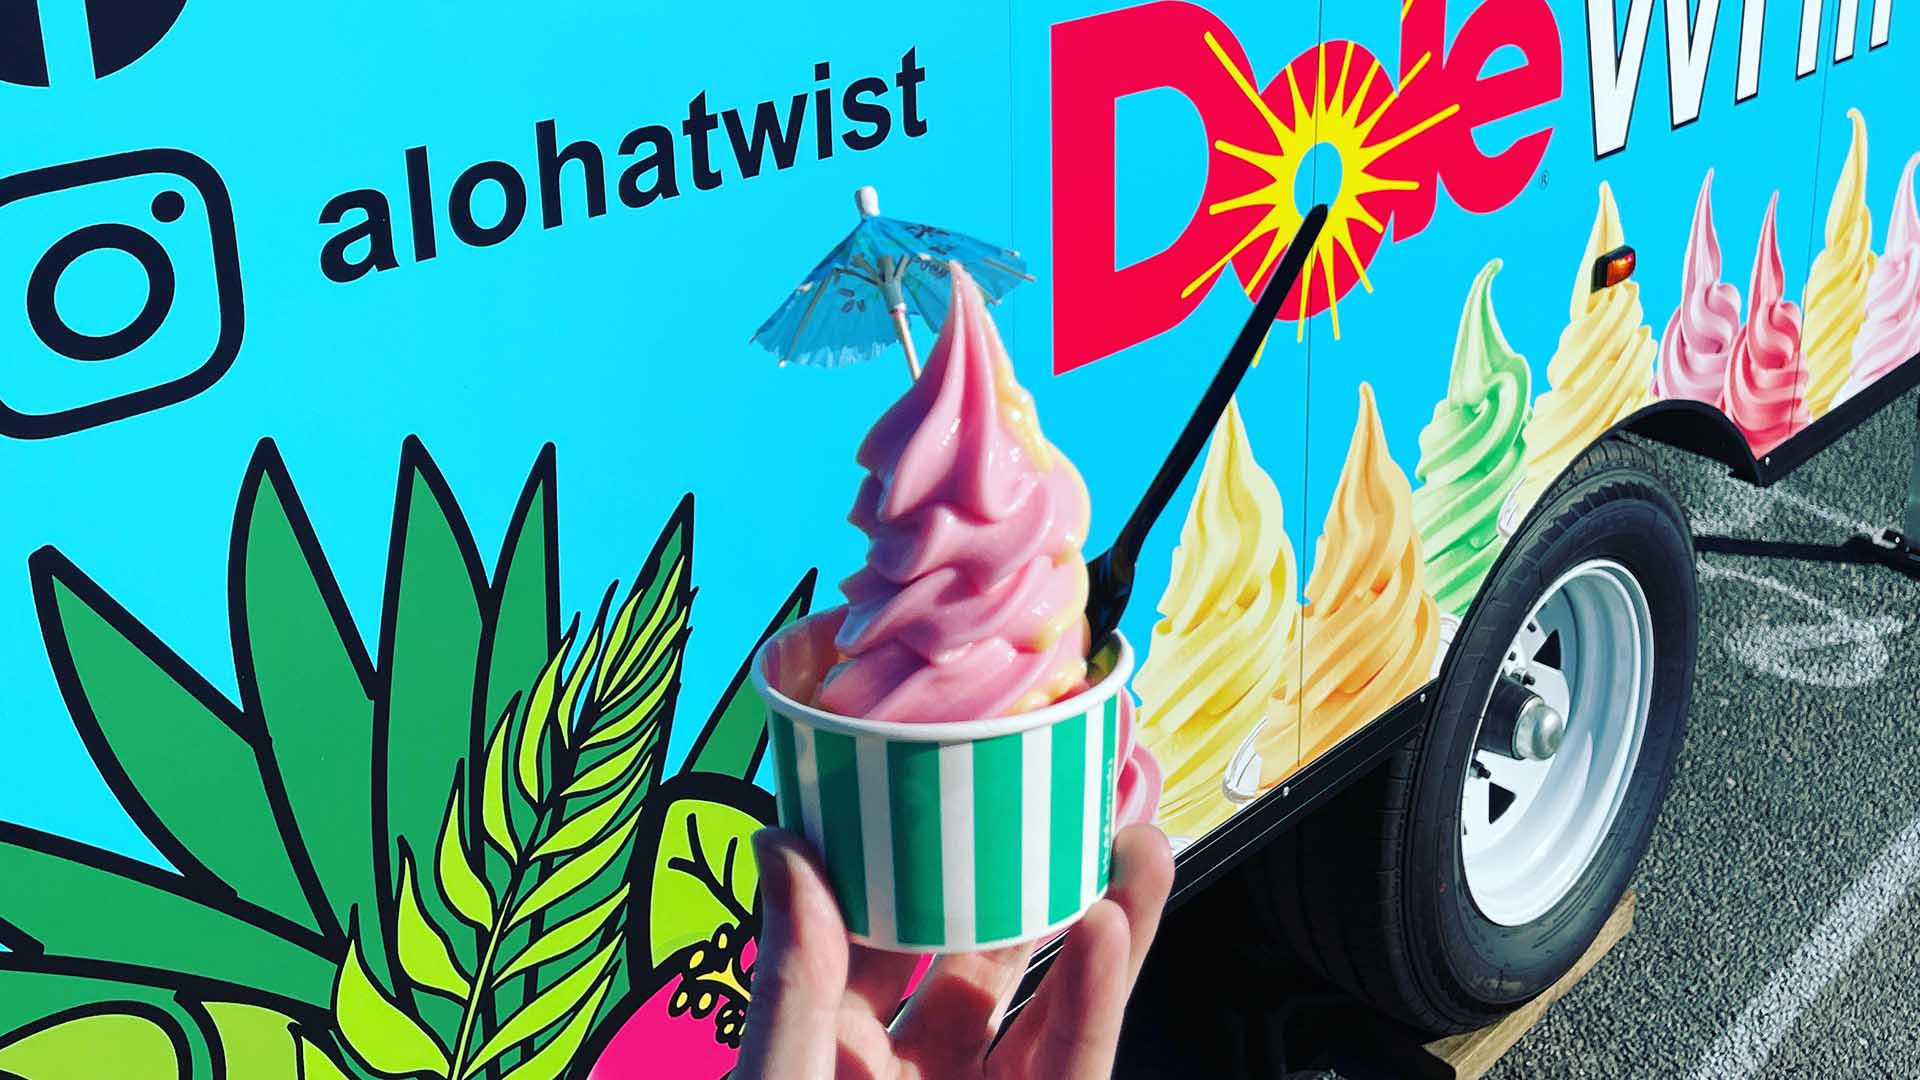 Disneyland's Famed Dole Whip Soft Serve Is Coming to Brisbane for the First Time